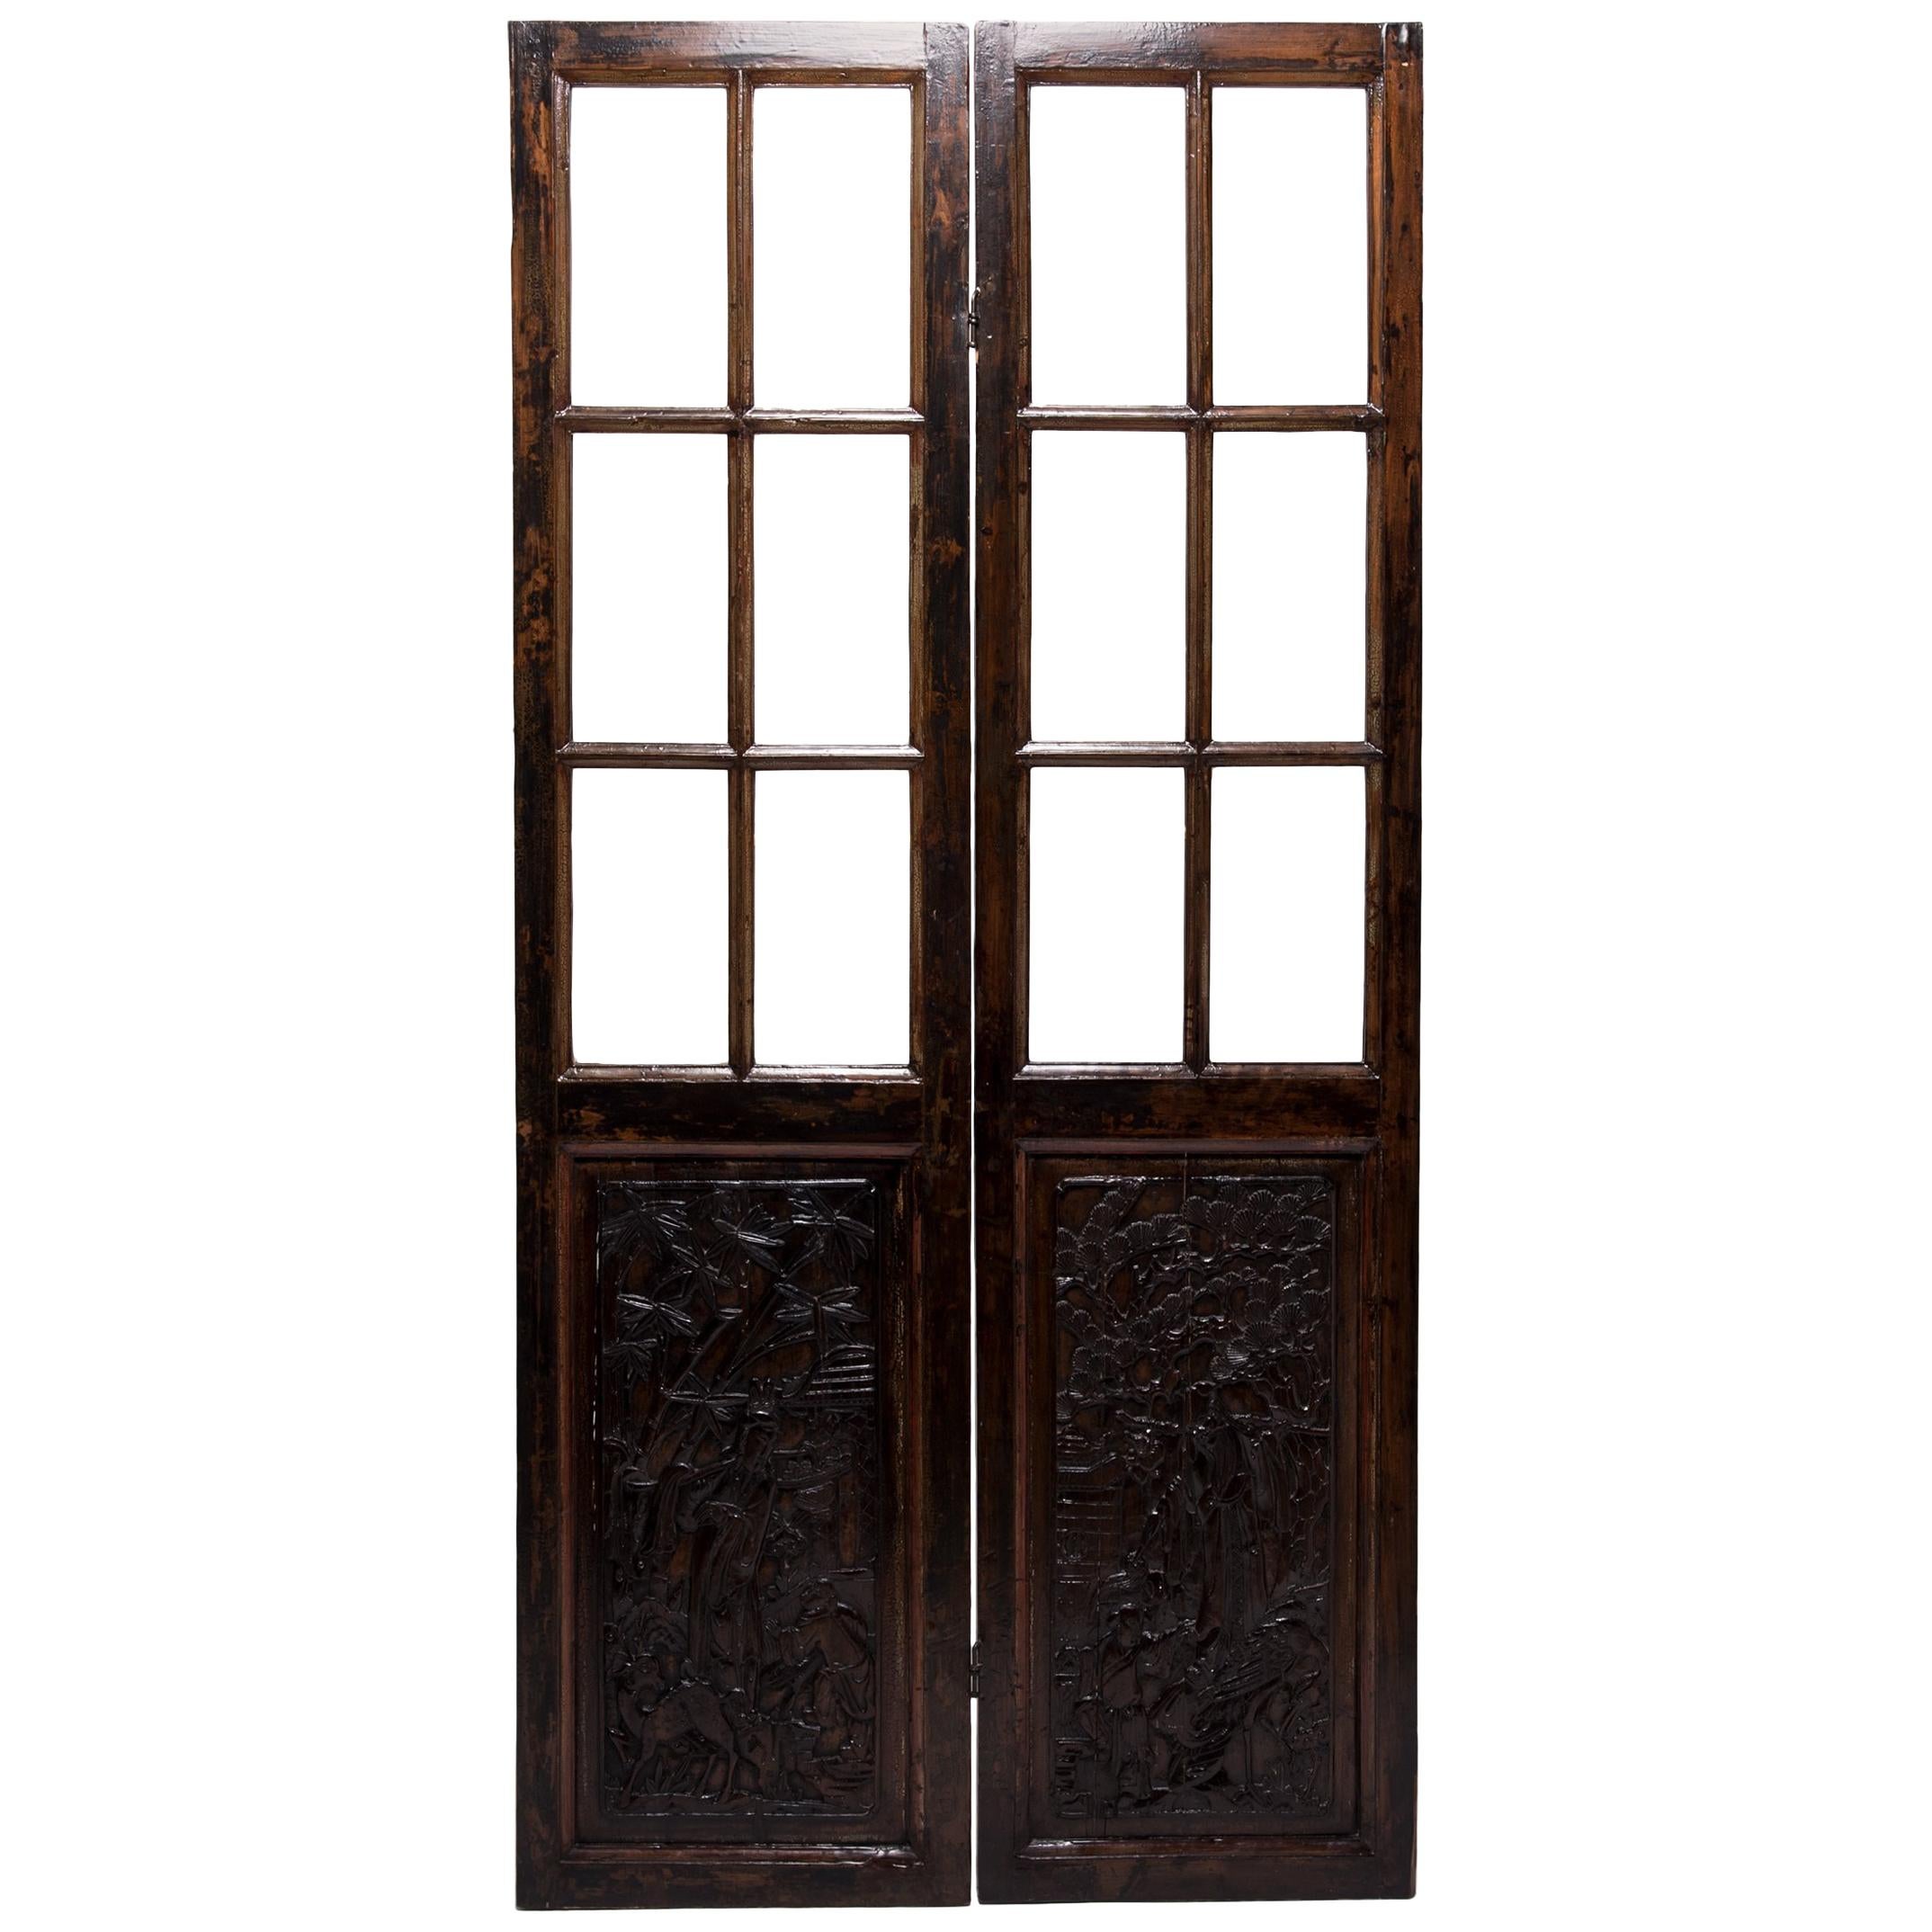 Pair of Chinese Carved Doors with Glass Window Panels, c. 1900 For Sale